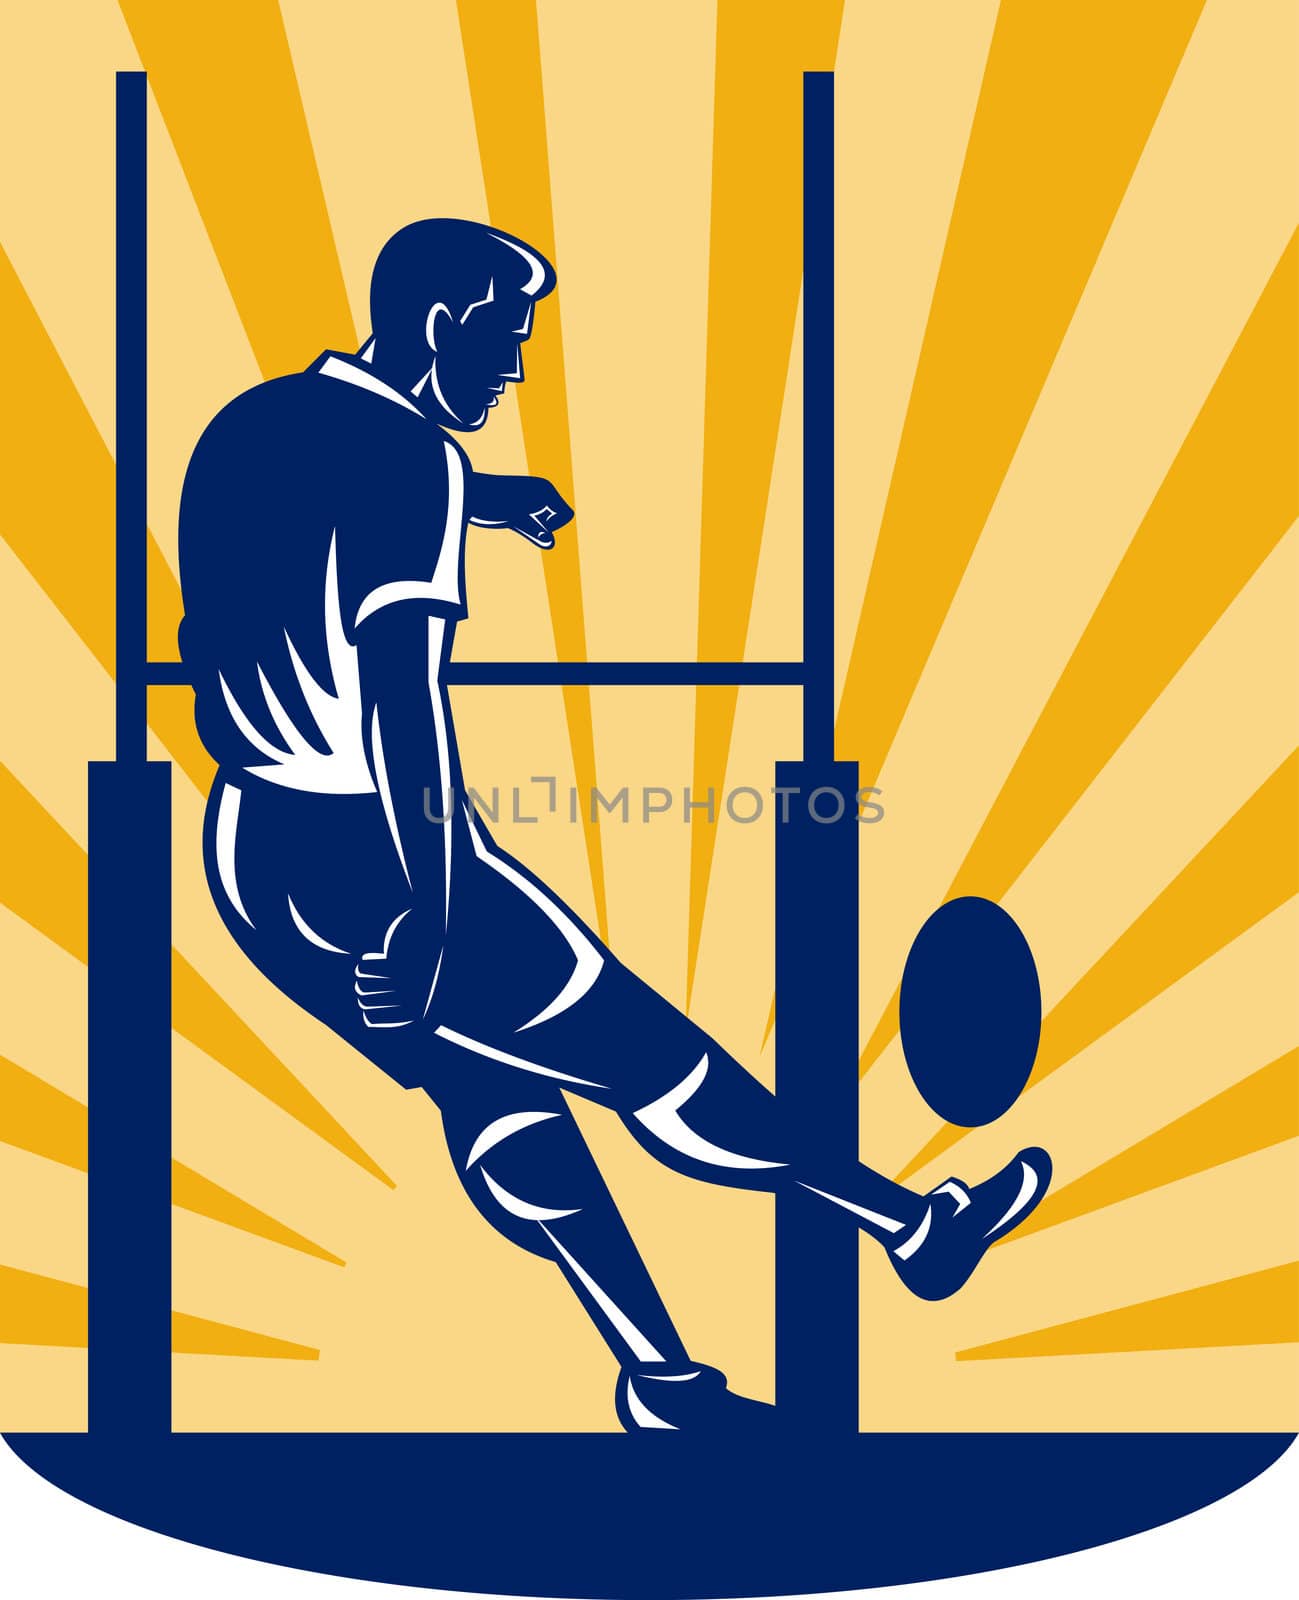 illustration of a rugby player kicking at goal post